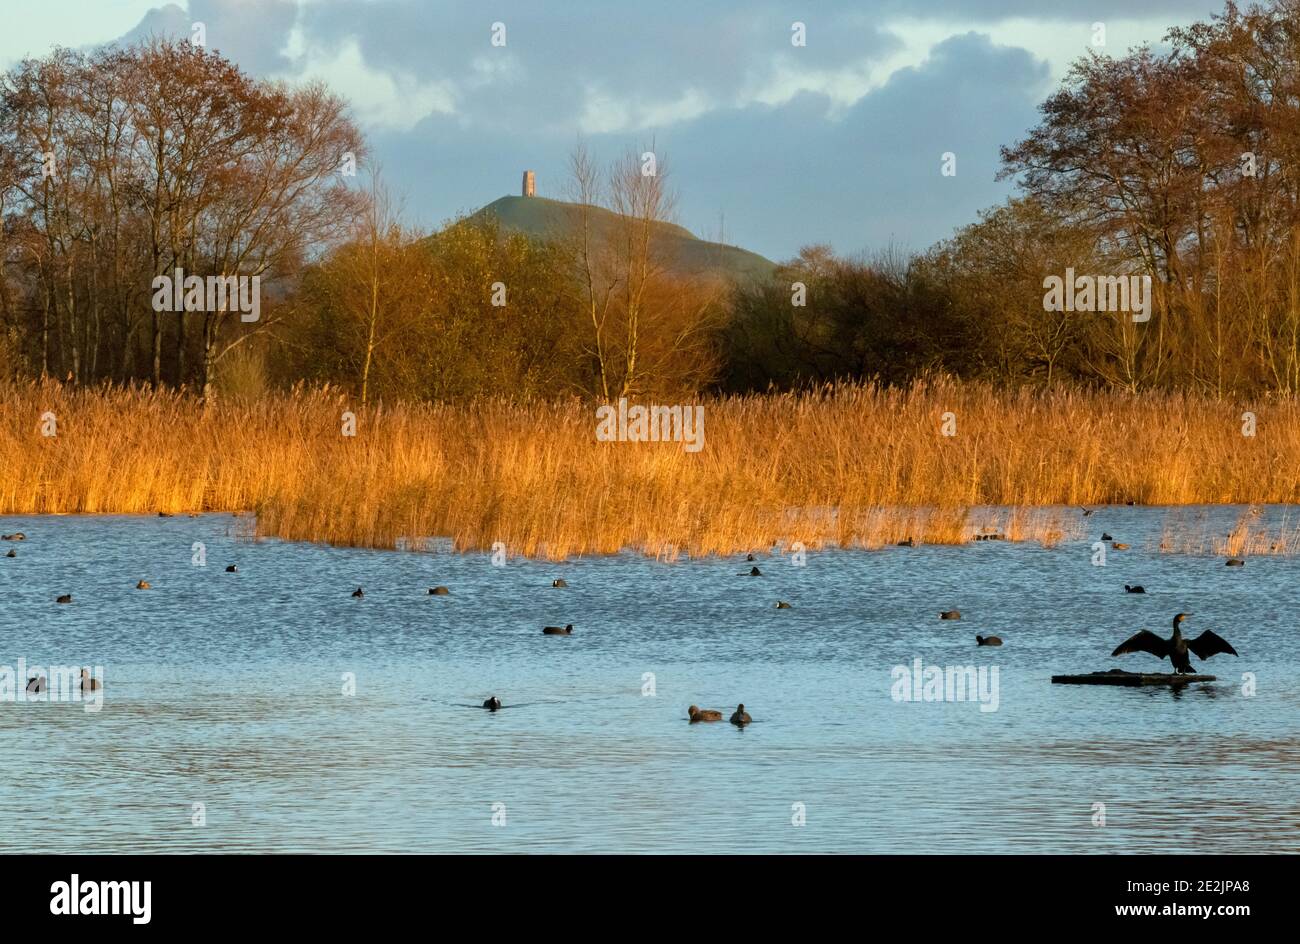 Ham Wall, RSPB reserve on the Somerset Levels, in winter, with Glastonbury Tor beyond. Common Cormorant and coots on the lake. Stock Photo